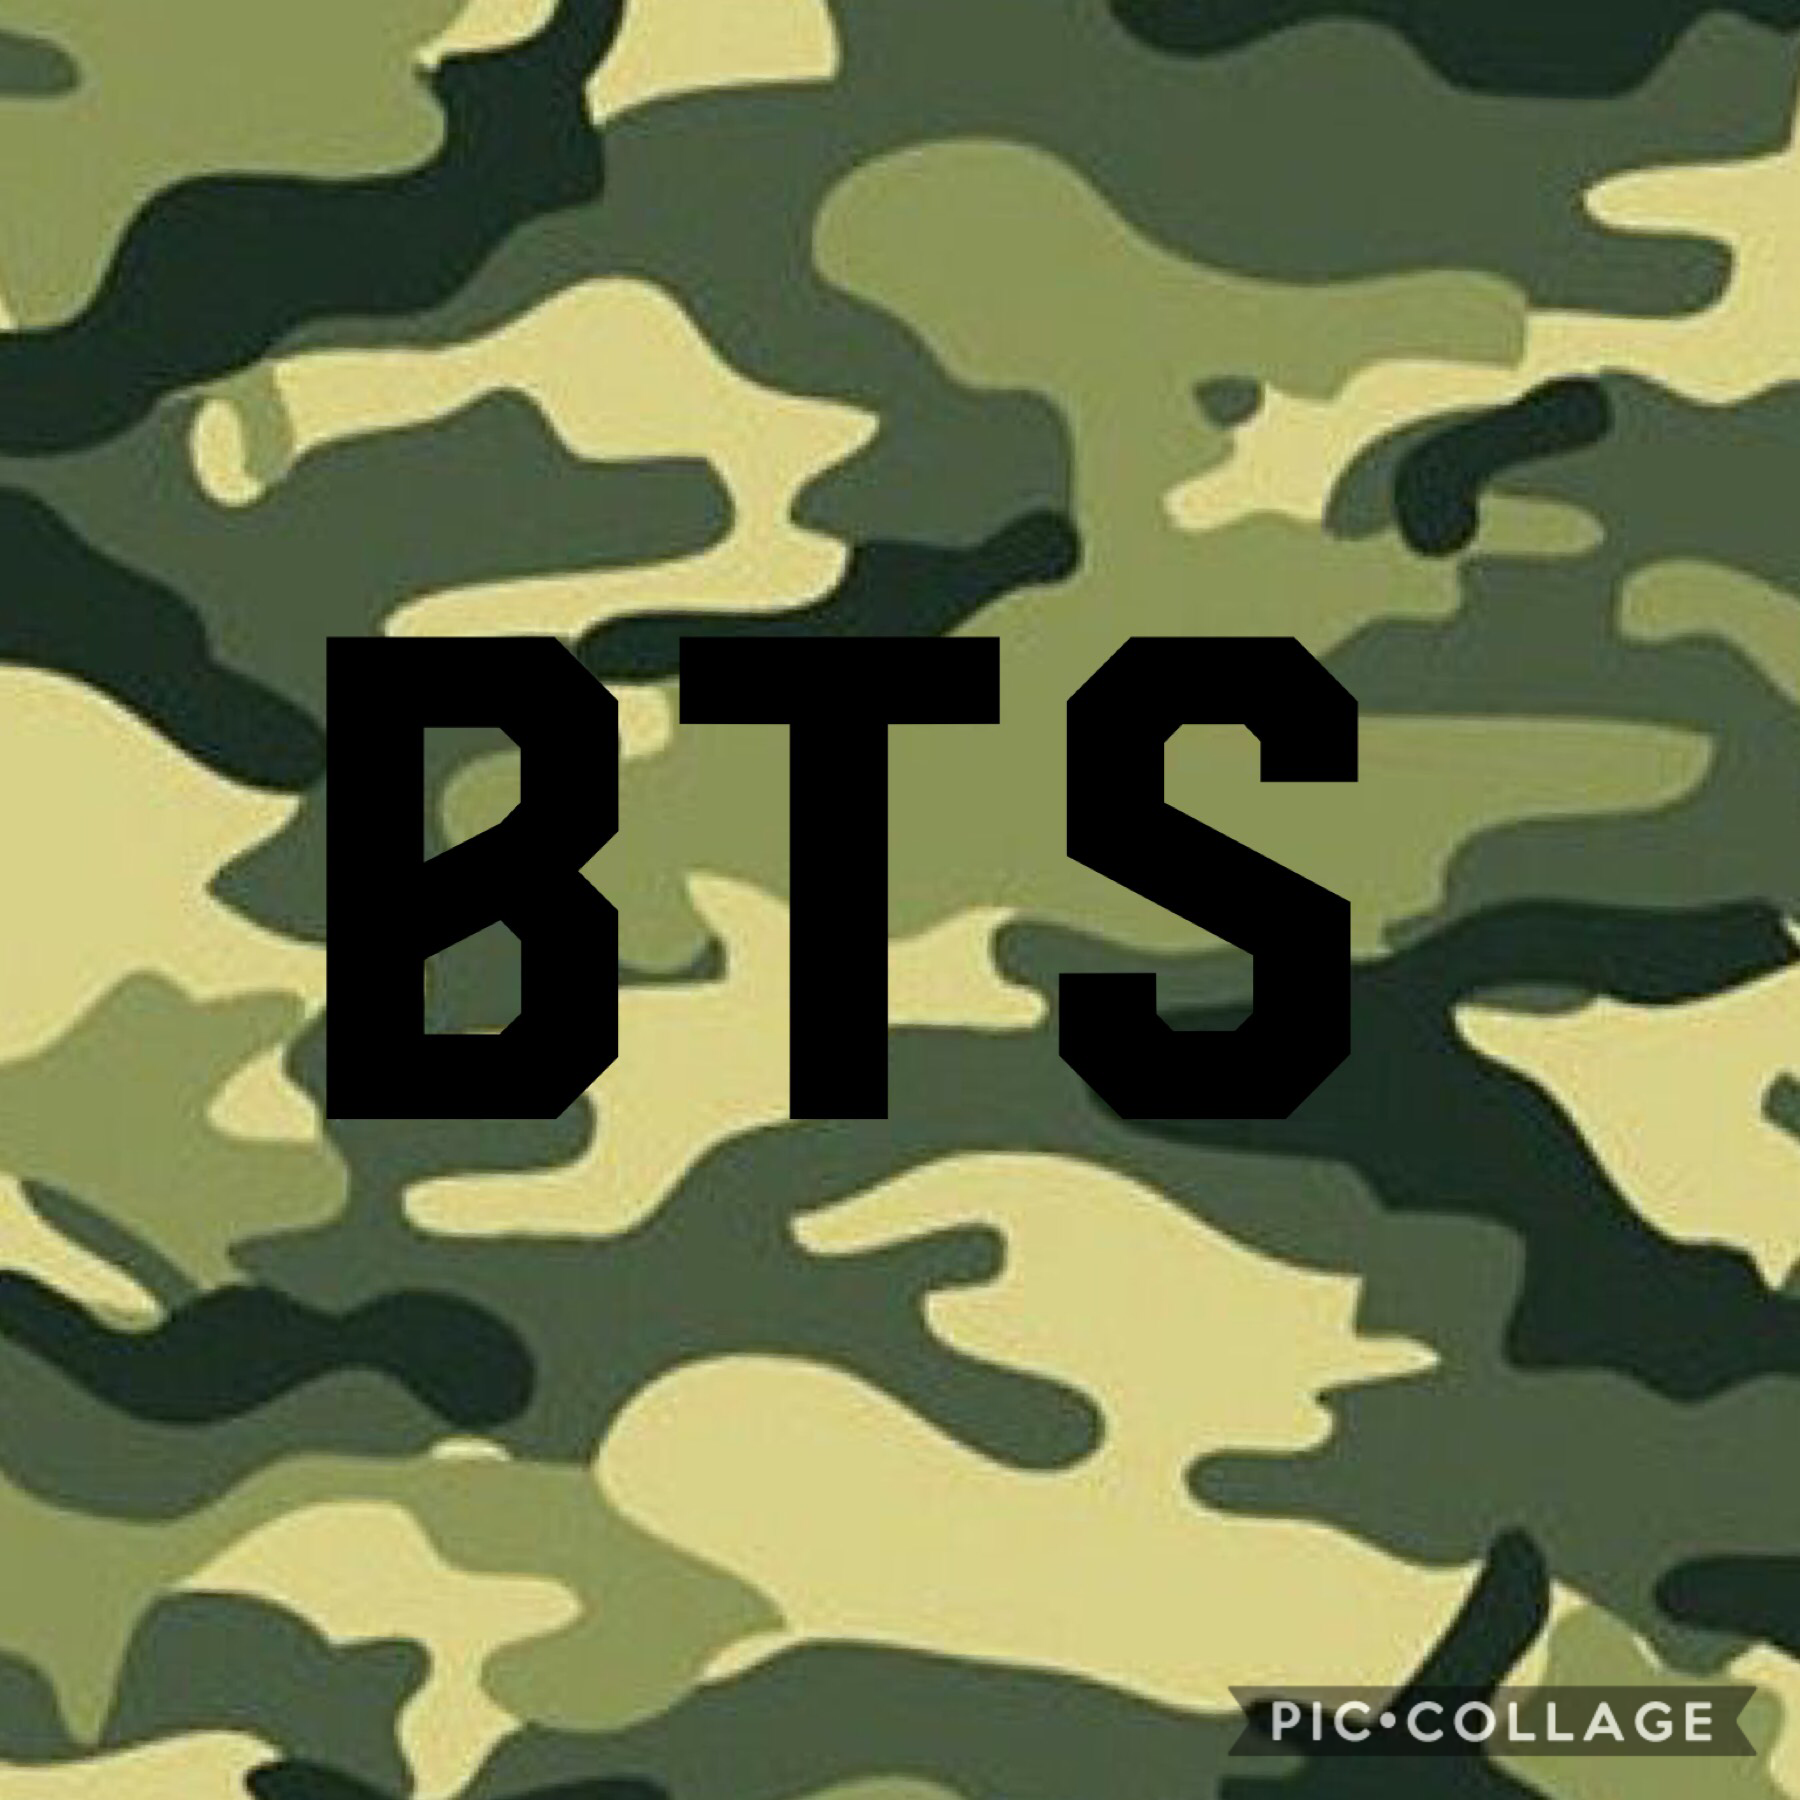 Like if your an Army ( BTS fan name )